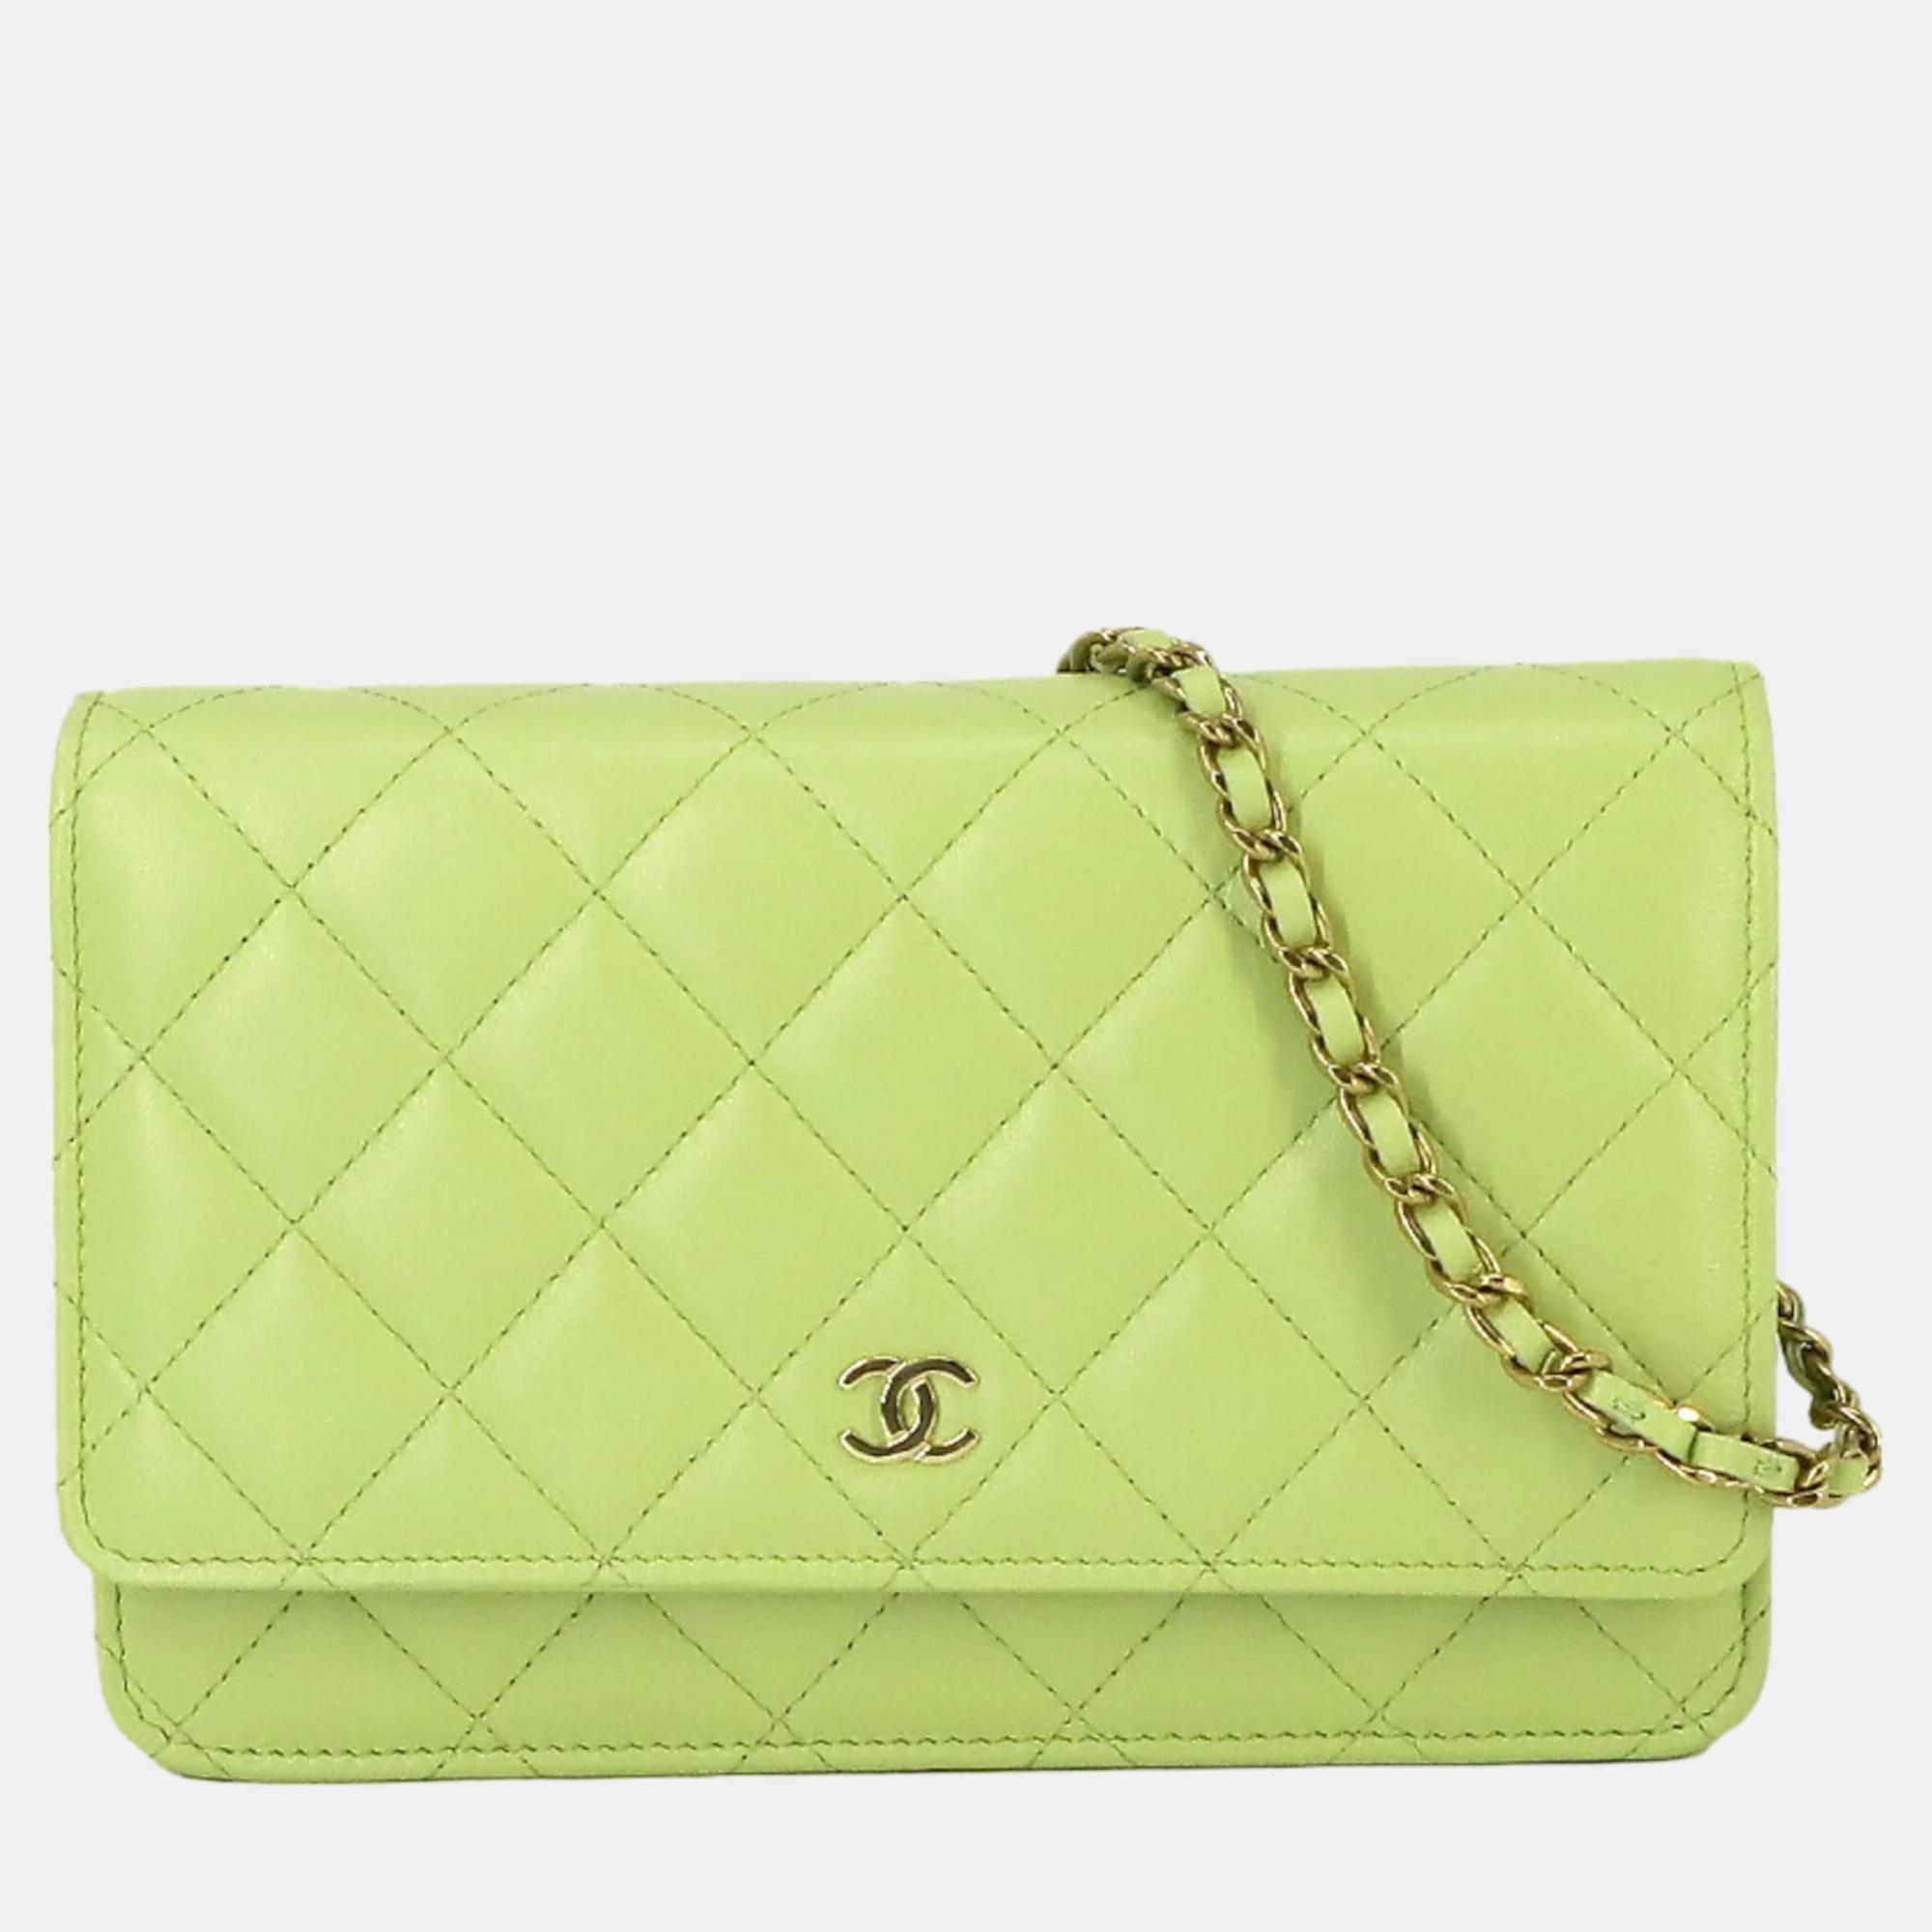 Chanel light green leather classic wallet on chain